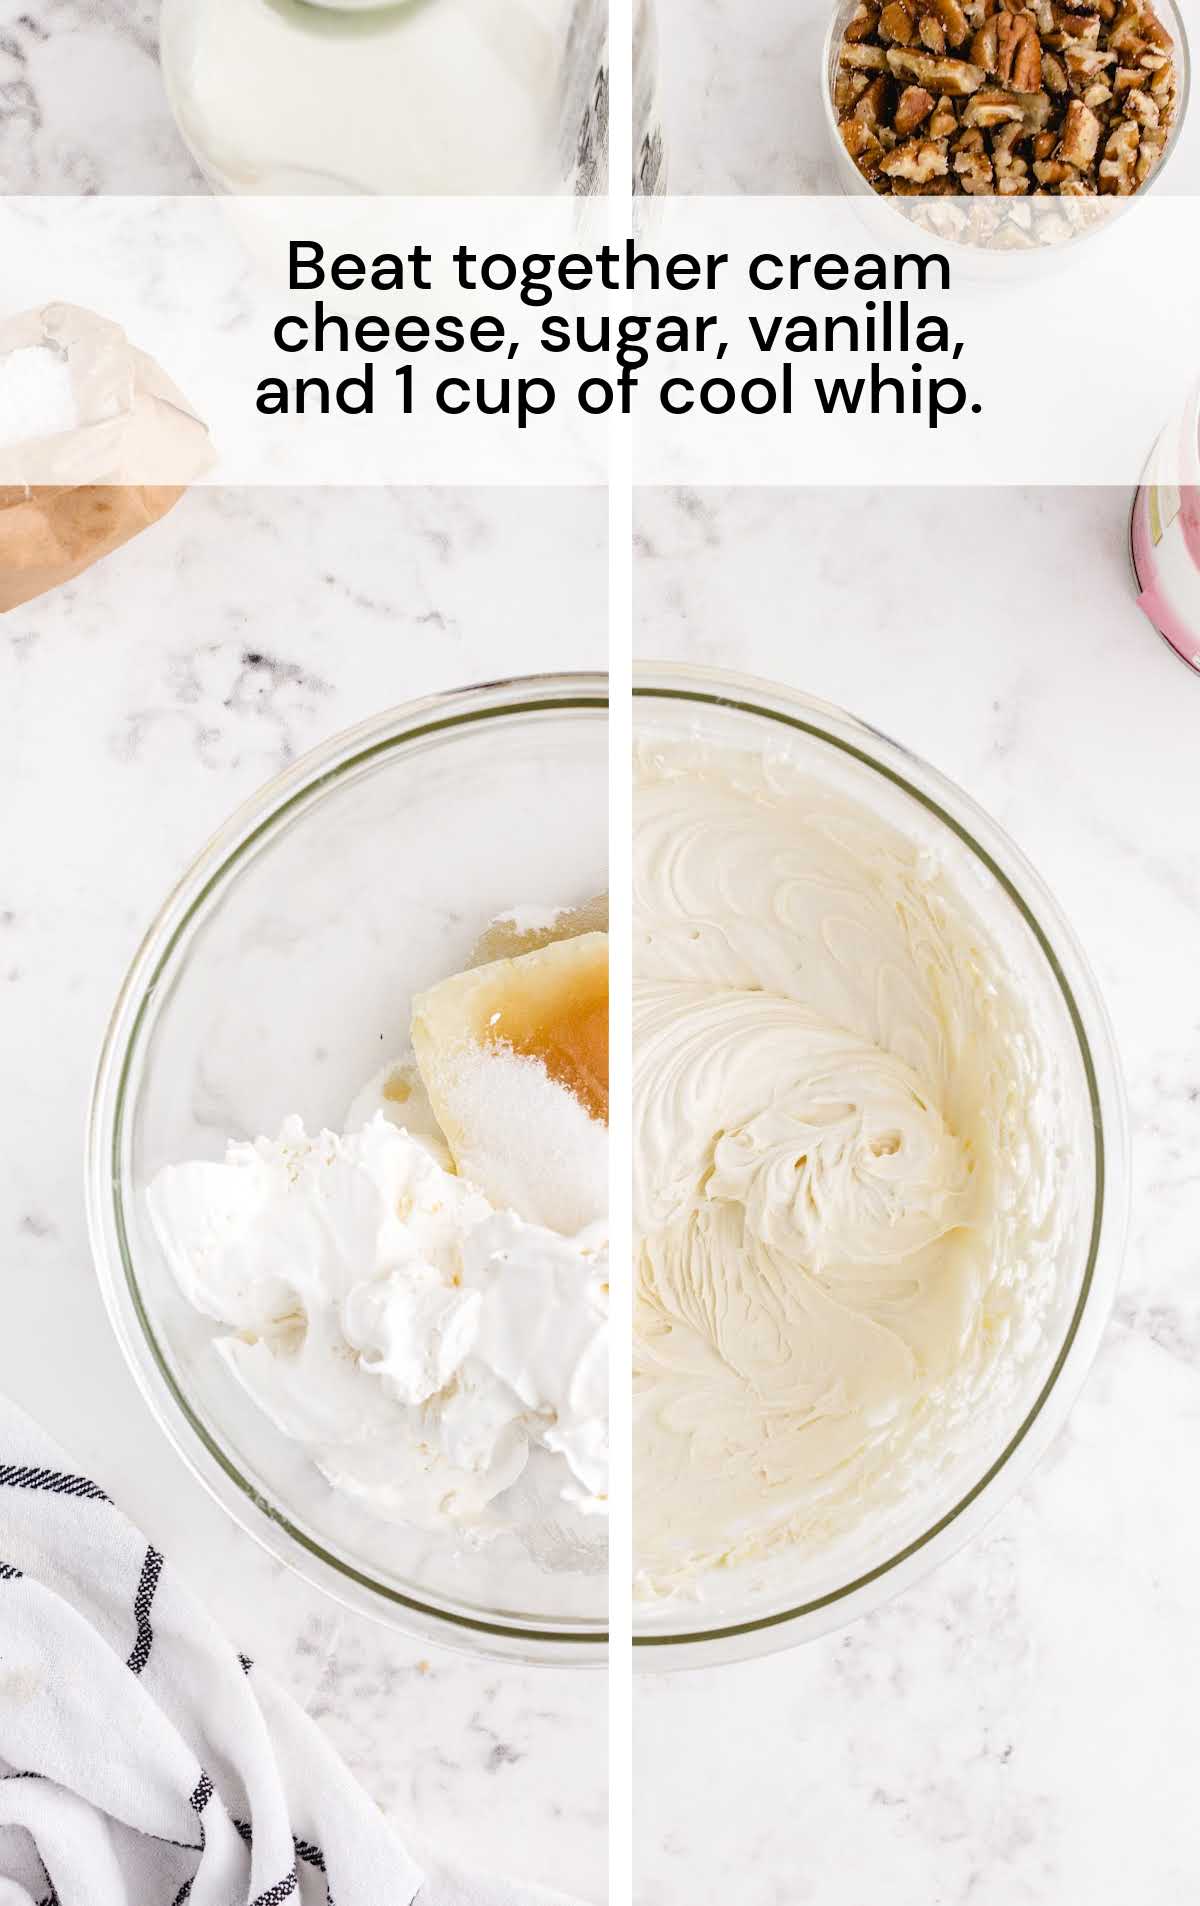 cream cheese, sugar, vanilla, and cool whip blended together in a bowl